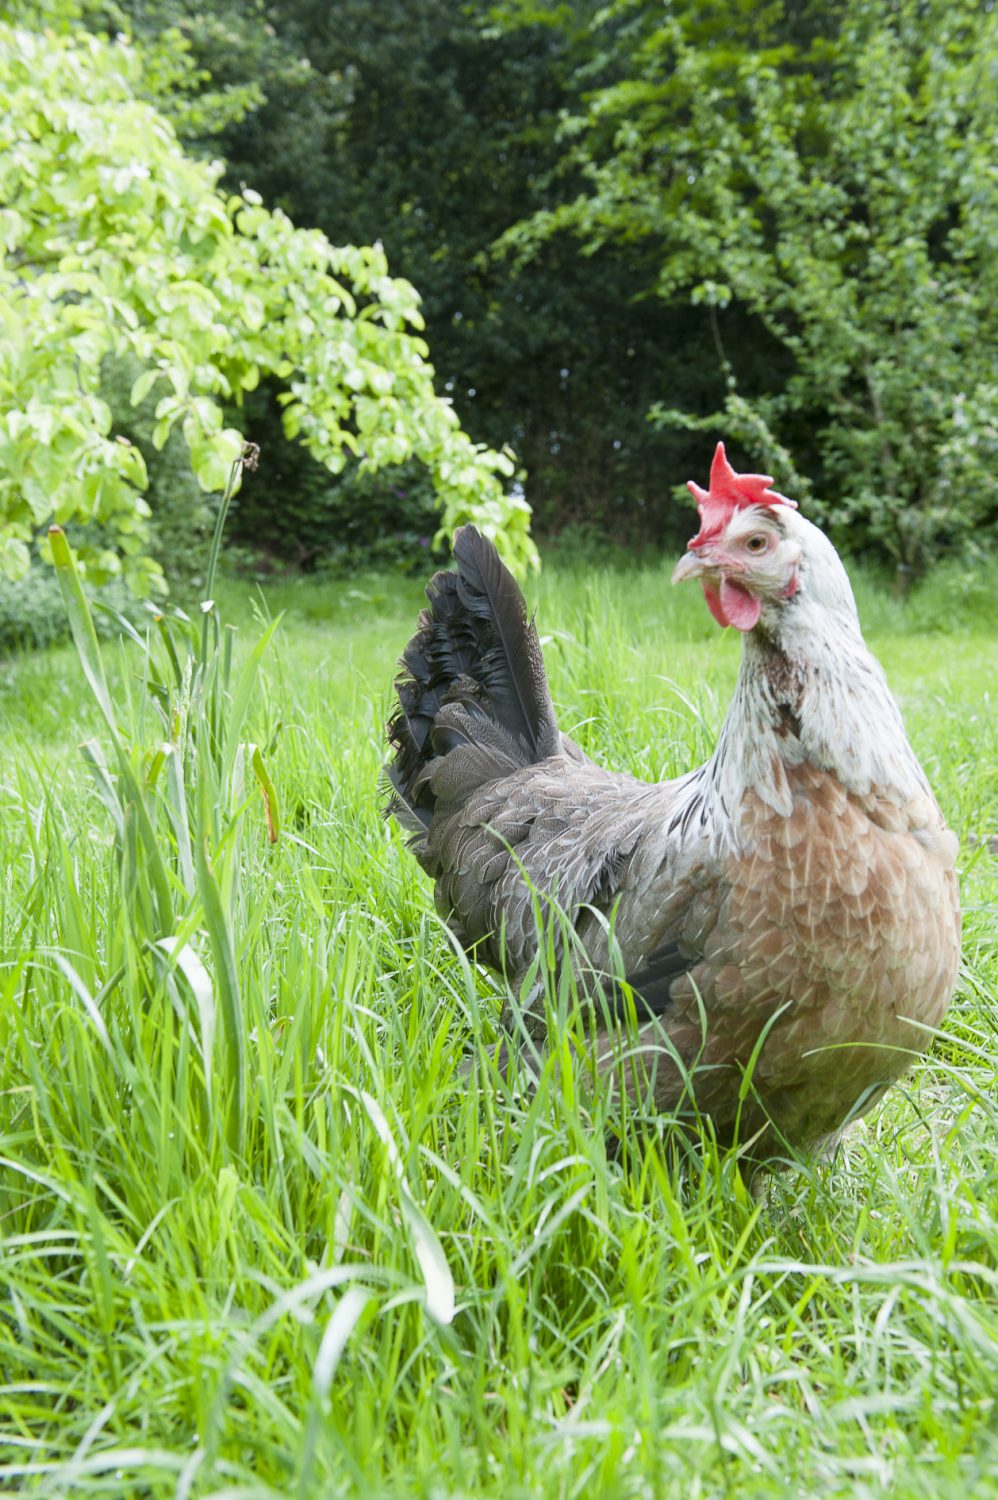 We’re led back up through the garden into the orchard where her comely purebred hens – Buff Laced Wyandotte, Speckled Sussex and Silver-grey Dorking – amble contentedly around